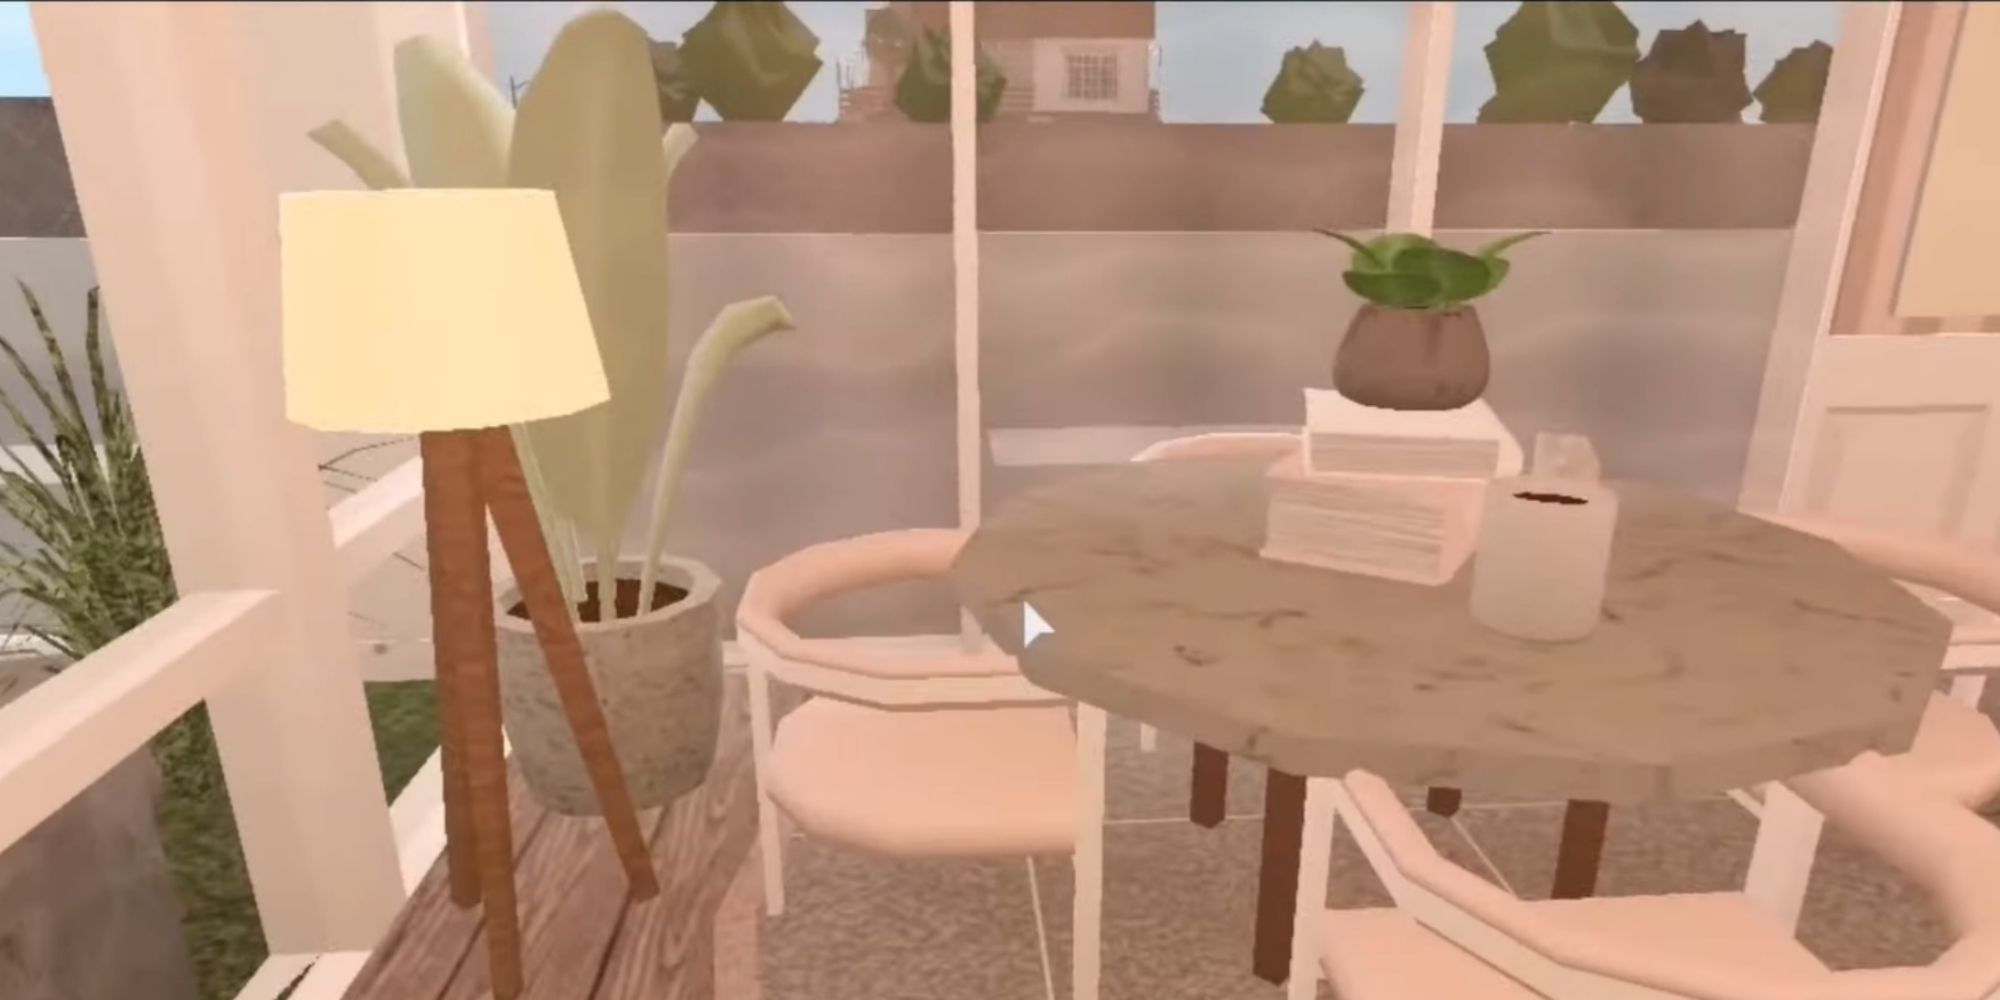 a roblox cafe table with a small plant on the center of it